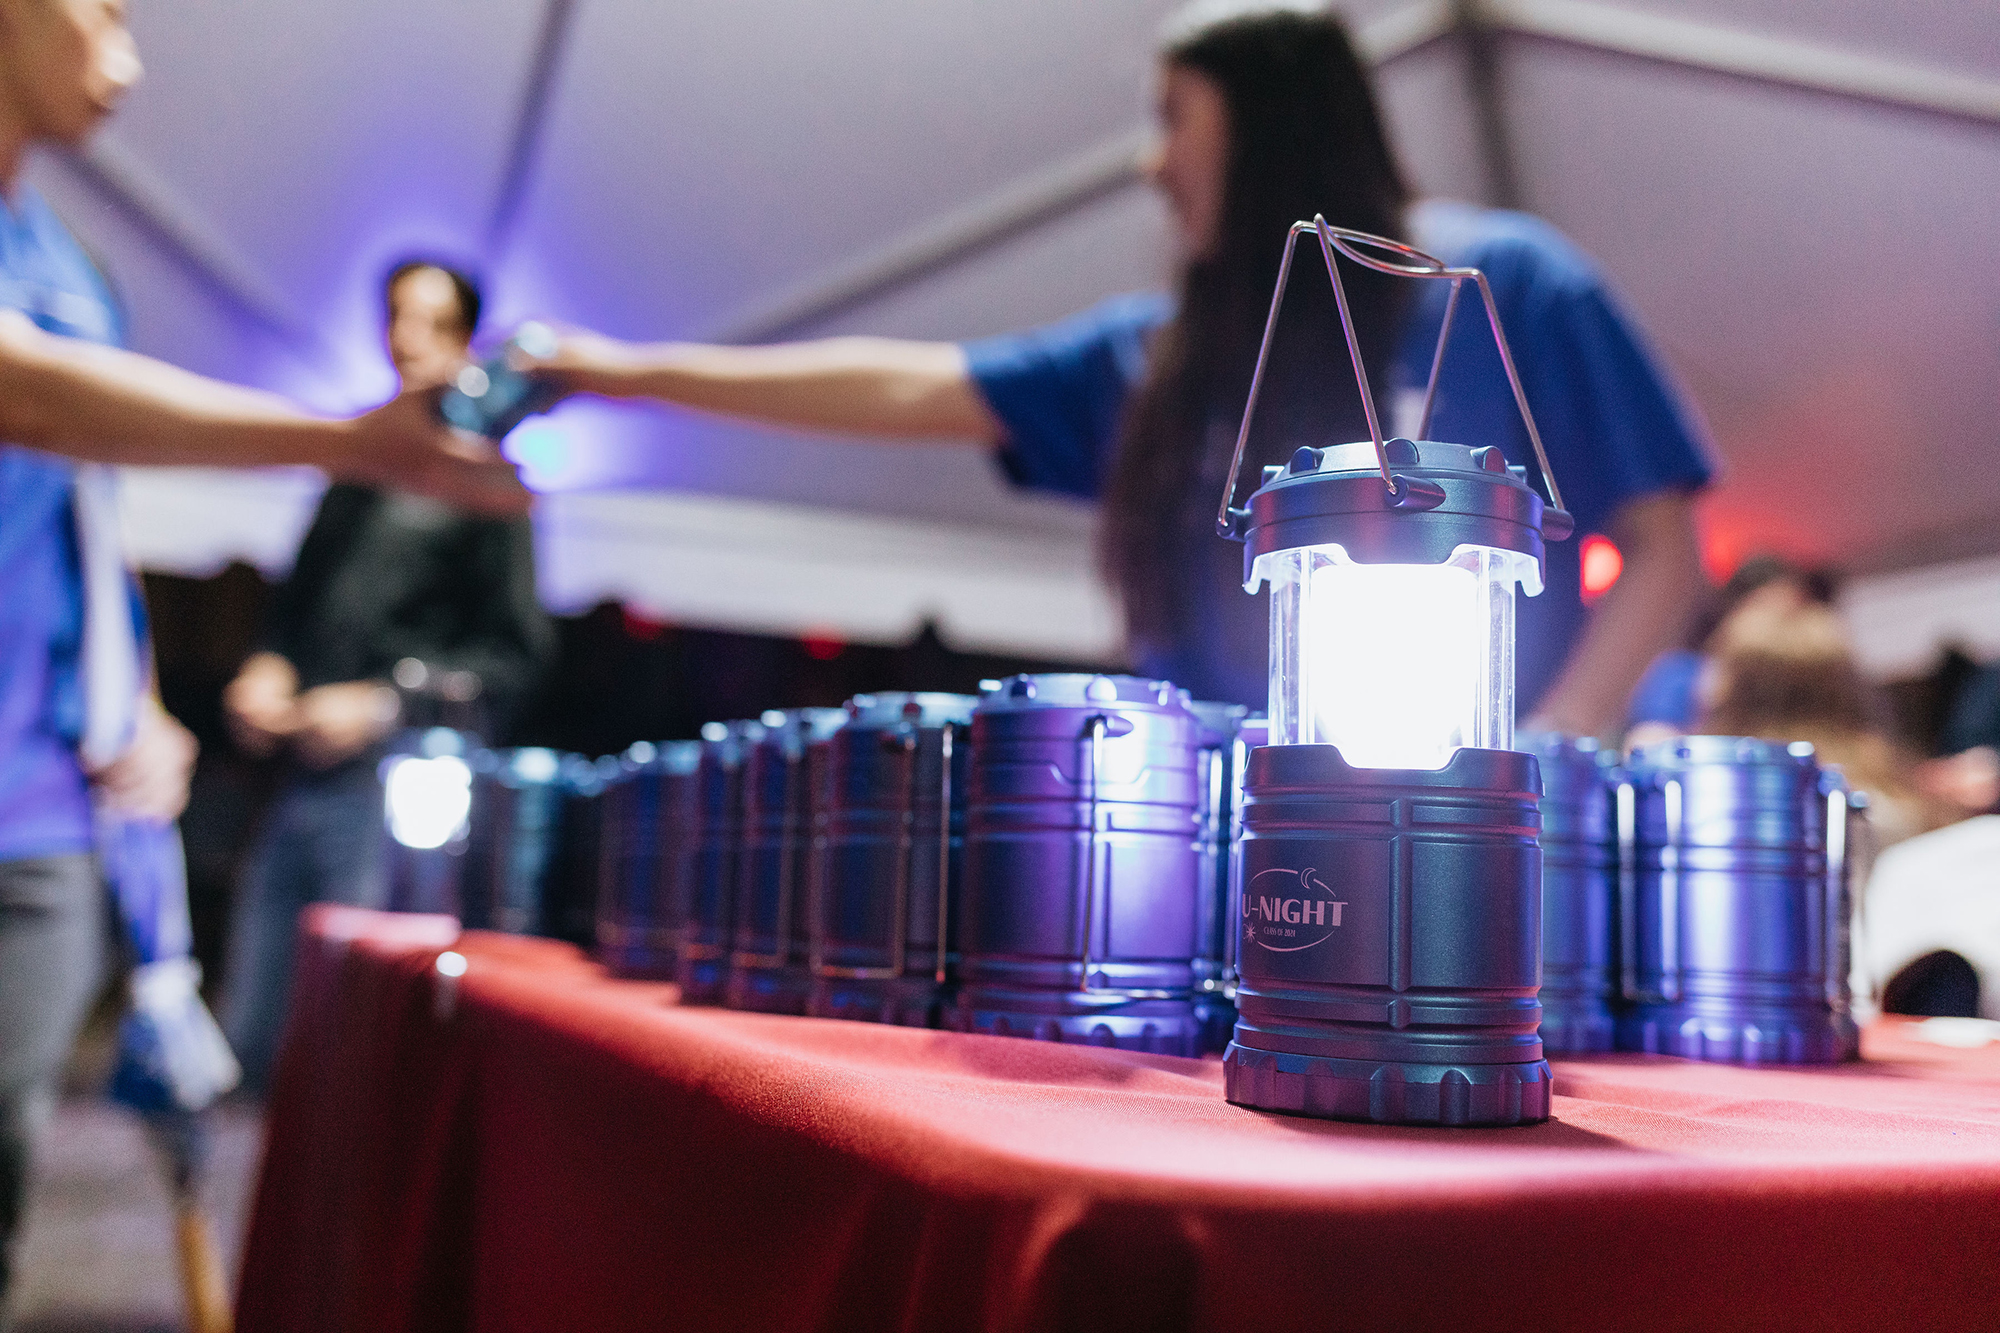 An illuminated battery-powered lantern is lit on a table among other lanterns, behind it a person hands a student a lantern.